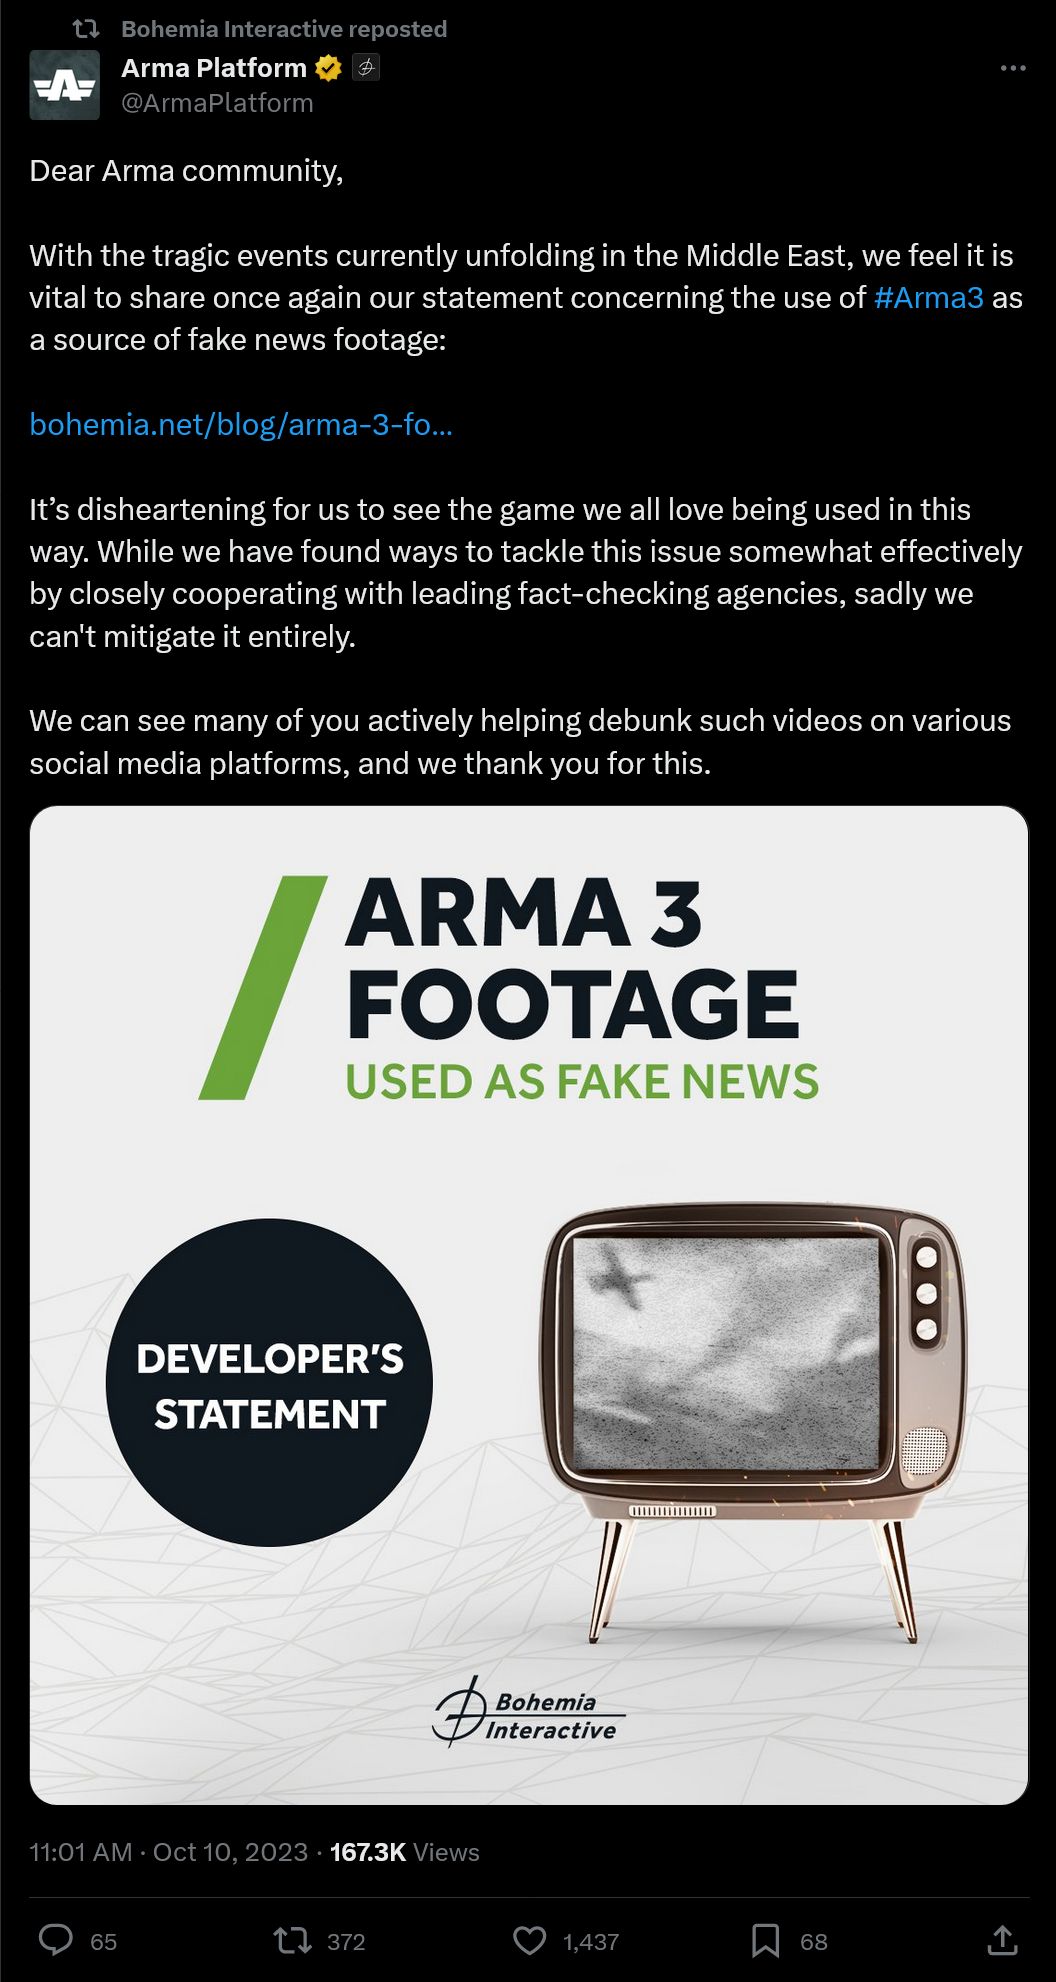 Dear Arma community, With the tragic events currently unfolding in the Middle East, we feel it is vital to share once again our statement concerning the use of #Arma3 as a source of fake news footage: https://bohemia.net/blog/arma-3-footage-being-used-as-fake-news It’s disheartening for us to see the game we all love being used in this way. While we have found ways to tackle this issue somewhat effectively by closely cooperating with leading fact-checking agencies, sadly we can't mitigate it entirely. We can see many of you actively helping debunk such videos on various social media platforms, and we thank you for this.